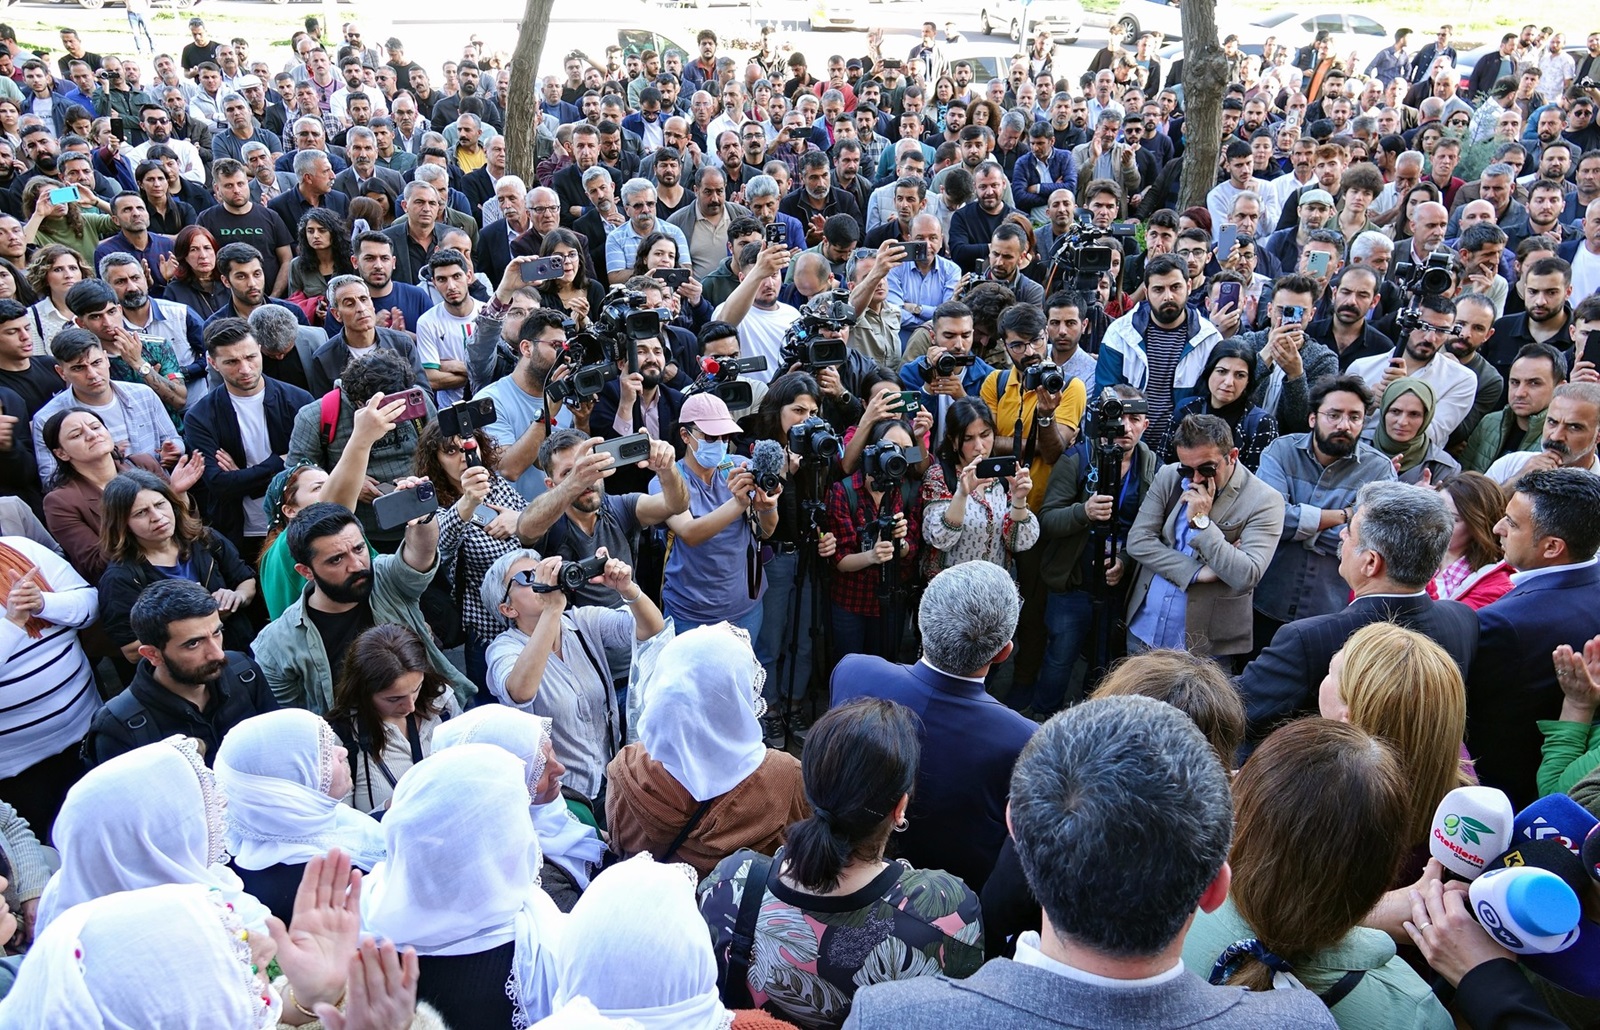 Protesters chant slogans during the demonstration. The decision of the Ministry of Justice to cancel the right to be elected Metropolitan Mayor candidate of the People's Equality and Democracy Party, Abdullah Zeydan, who won the local elections in Van, was protested by the Kurdish political parties. Executives and deputies of the People's Equality and Democracy Party (DEM Party) and the Democratic Regions Party (DBP) attended the protest in front of the Provincial Election Board building in Diyarbak?r. Hundreds of people gathered in front of the Electoral Board and protested the decision with slogans. The mayoral certificate of DEM Party member Abdullah Zeydan, who won the election with 55 percent of the votes, was given to Abdullah Arvas, the candidate of the ruling Justice and Development Party (AK Party), who finished the election in second place with 27 percent of the votes.,Image: 861935326, License: Rights-managed, Restrictions: *** World Rights ***, Model Release: no, Credit line: SOPA Images / ddp USA / Profimedia